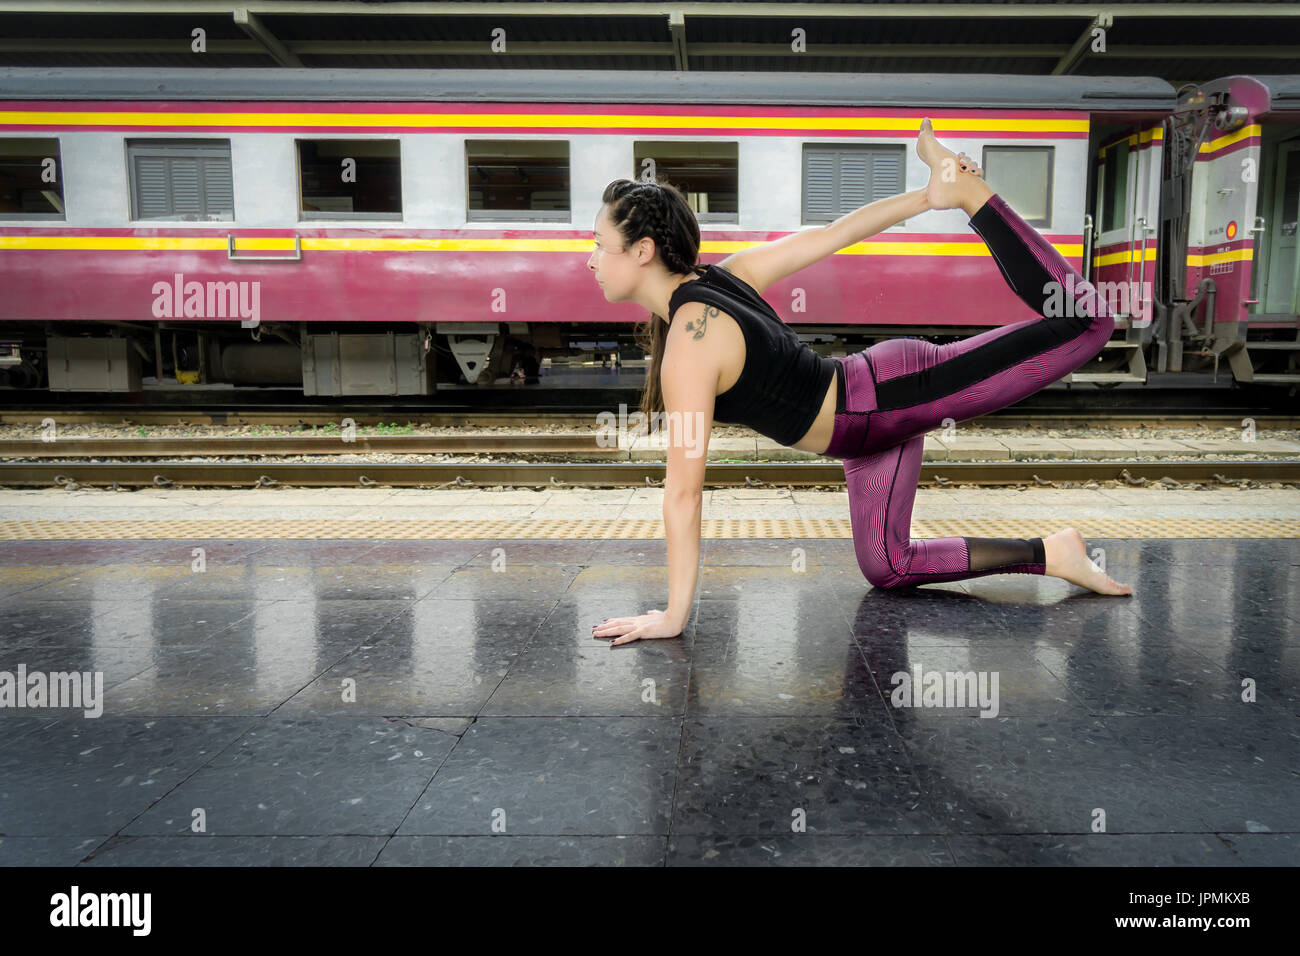 Healthy woman doing yoga poses outdoors on the floor of a train station in Asia weargin colorful fitness clothes Stock Photo